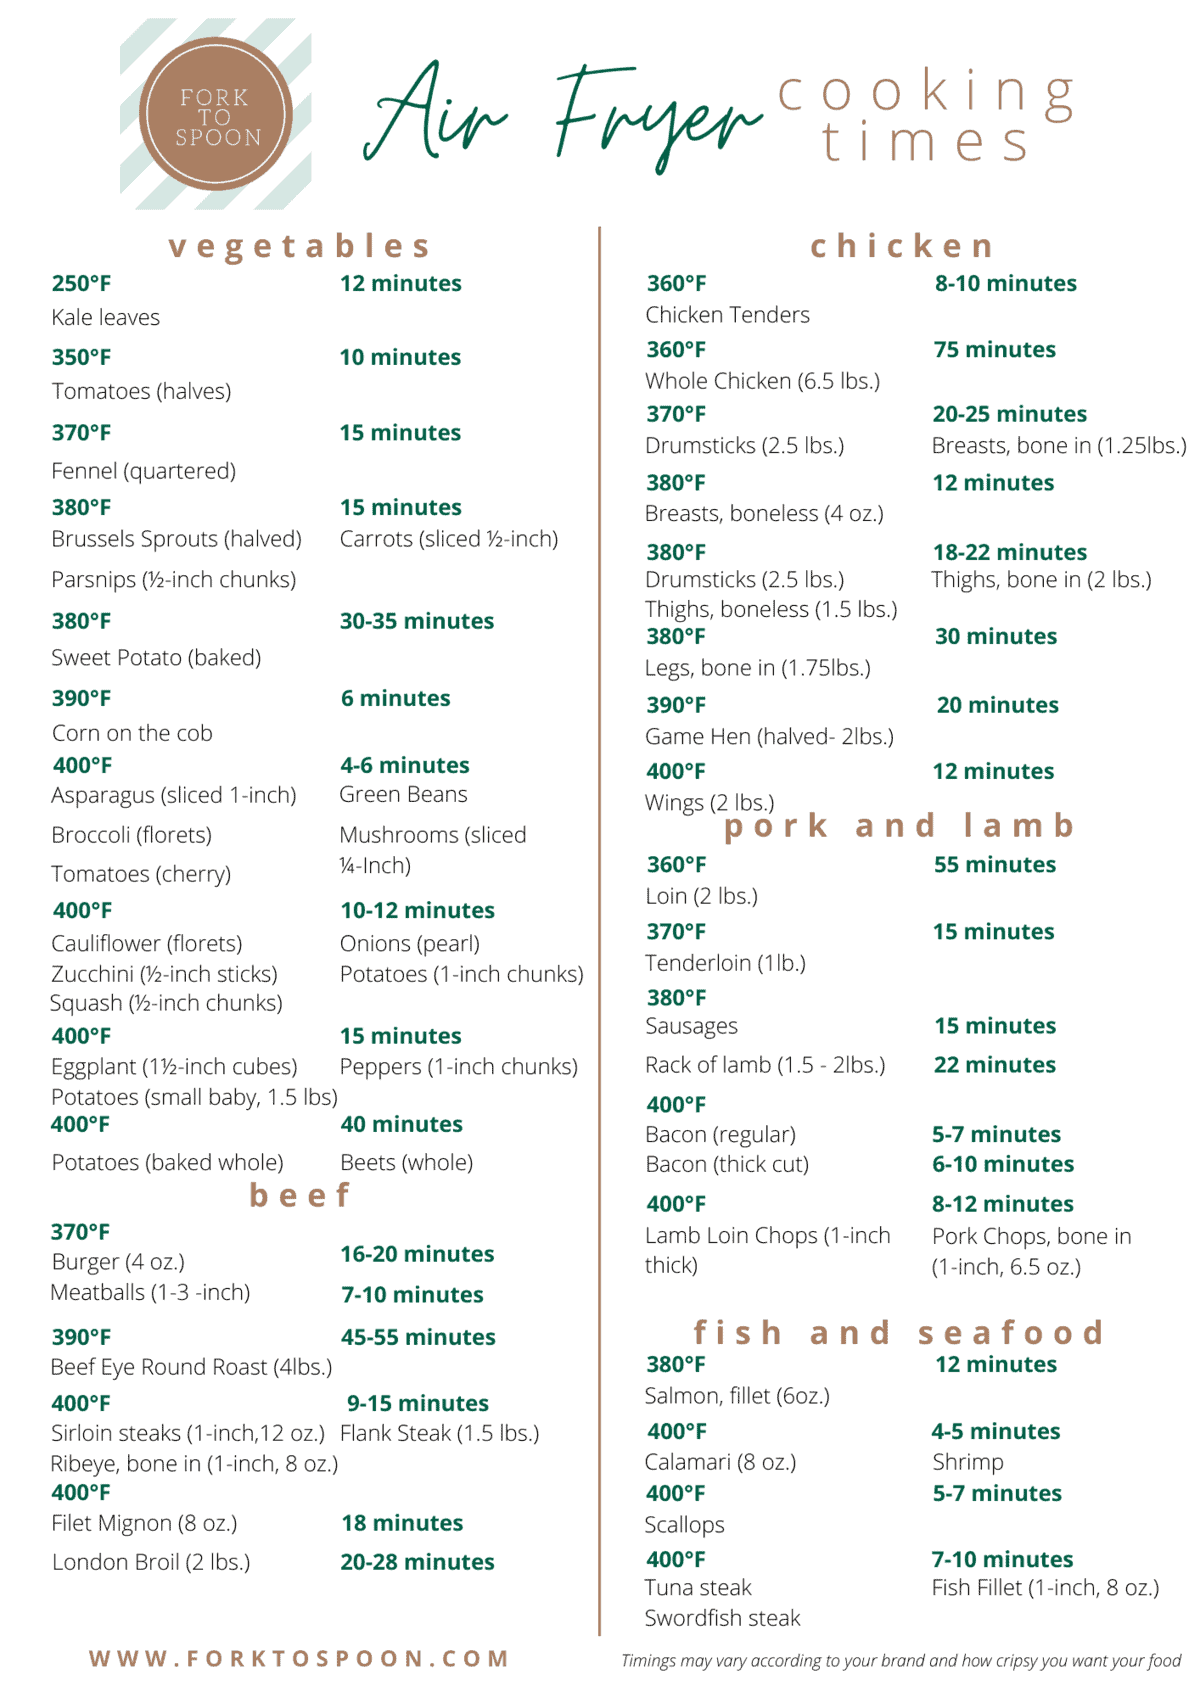 Air Fryer Cooking Times Cheat Sheets